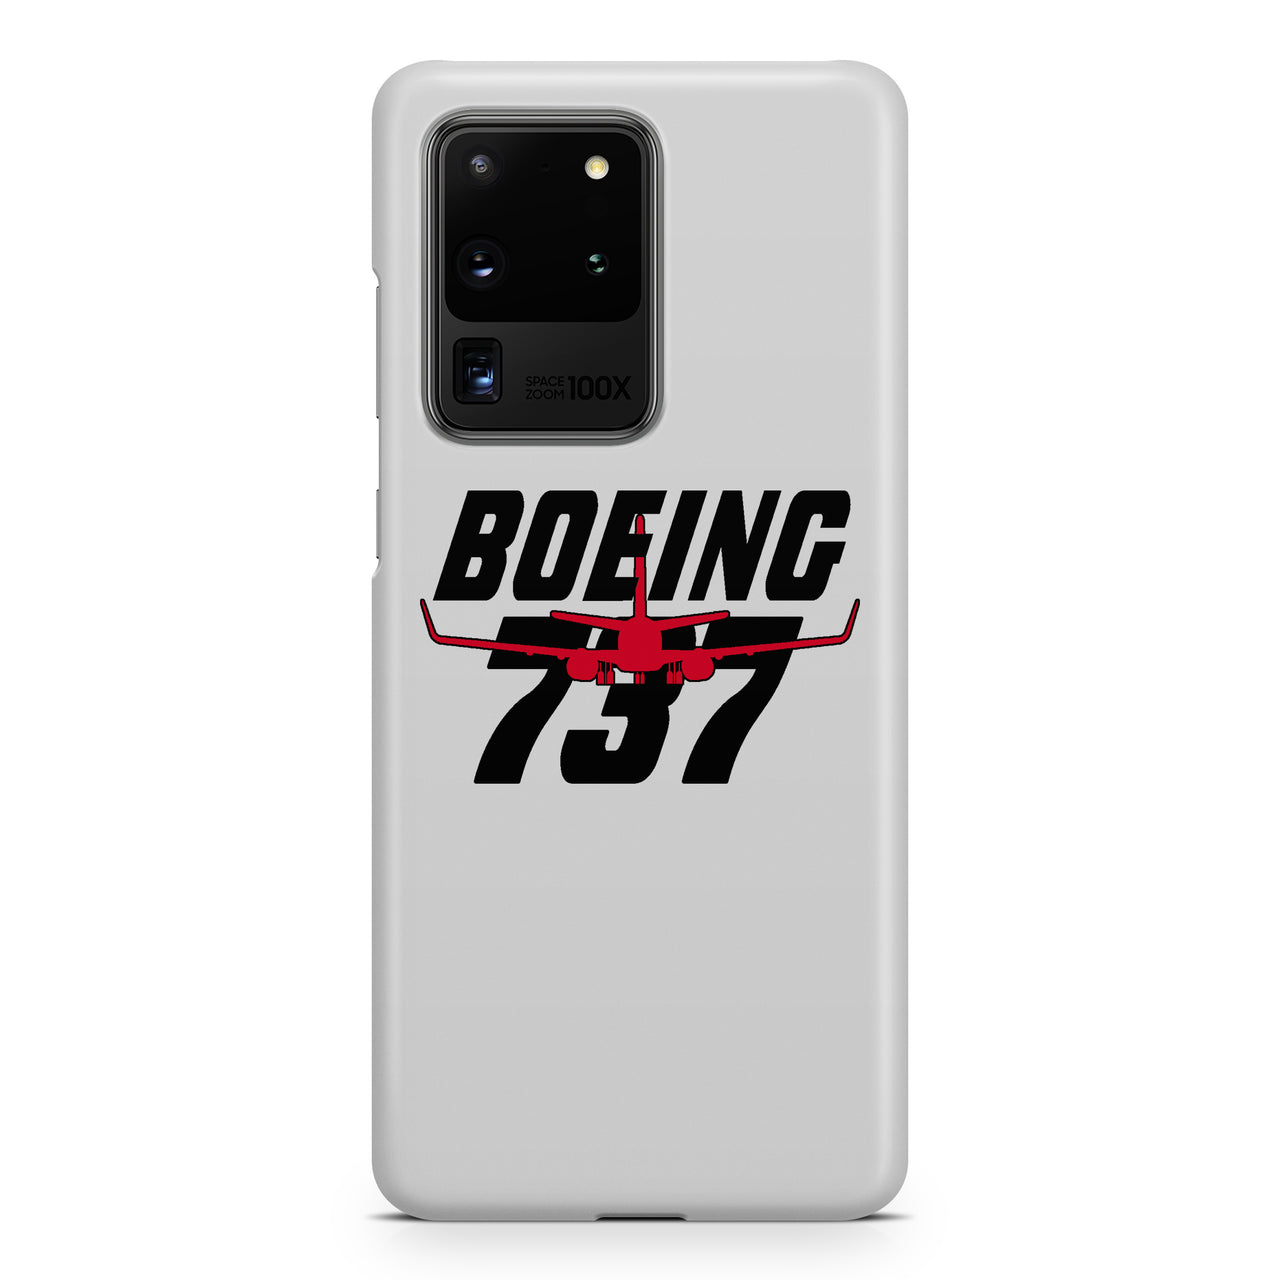 Amazing Boeing 737 Samsung S & Note Cases